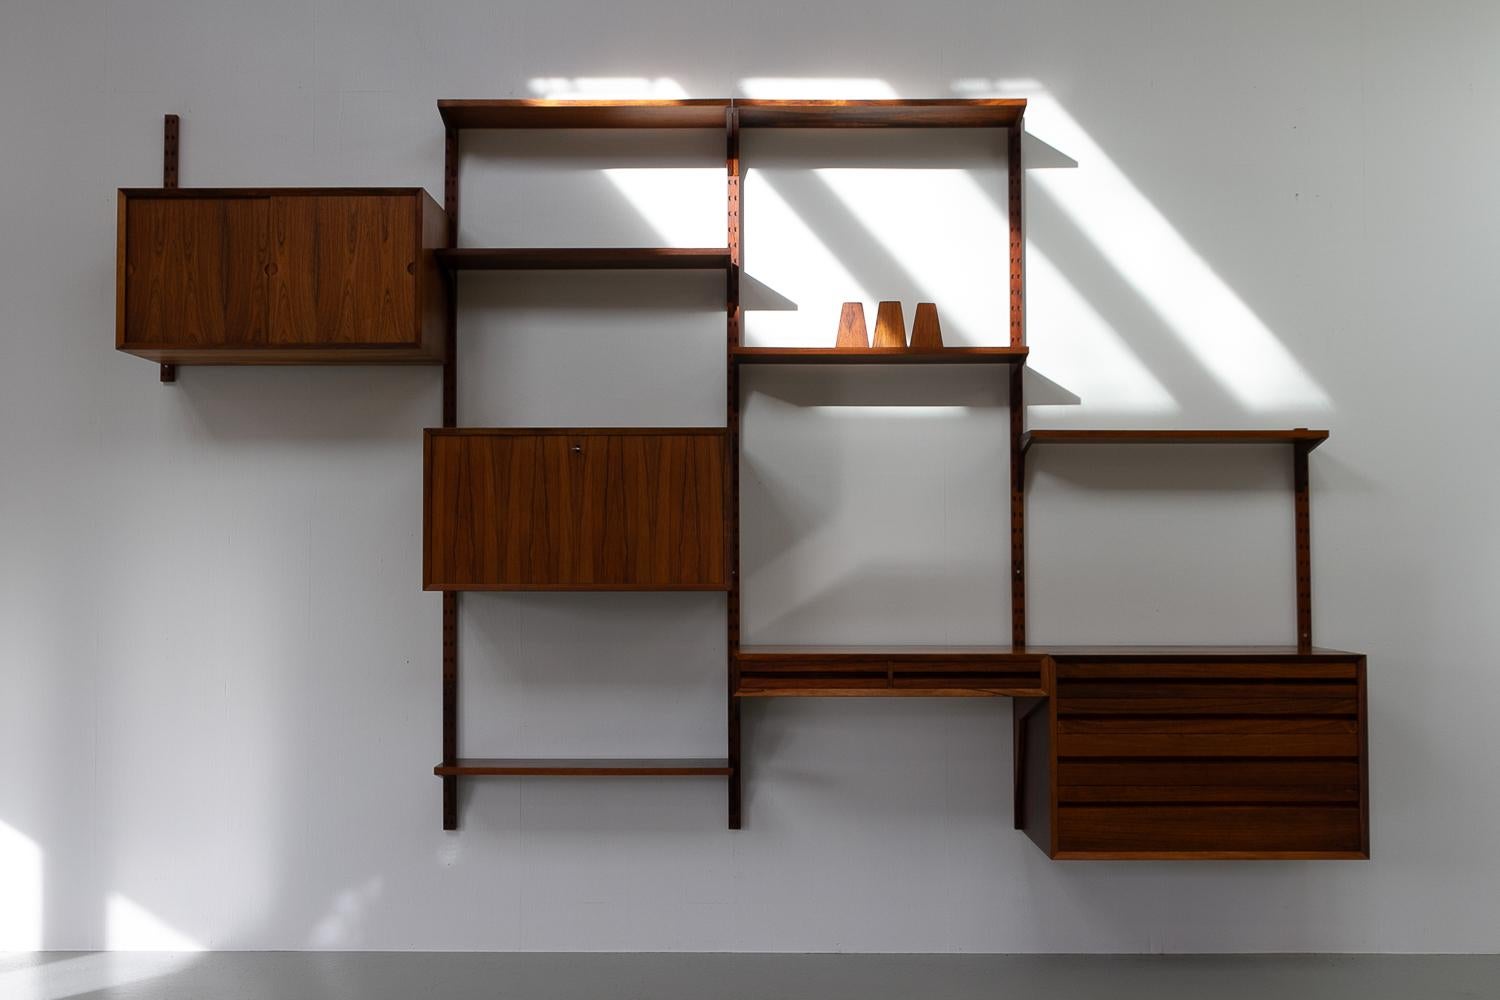 Vintage Danish rosewood modular wall unit by Poul Cadovius for Cado 1960s

Mid-Century Modern 4 bay shelving system model Cado. This is a original vintage floating bookcase designed by Danish architect Poul Cadovius. 
Cadovius had the revolutionary